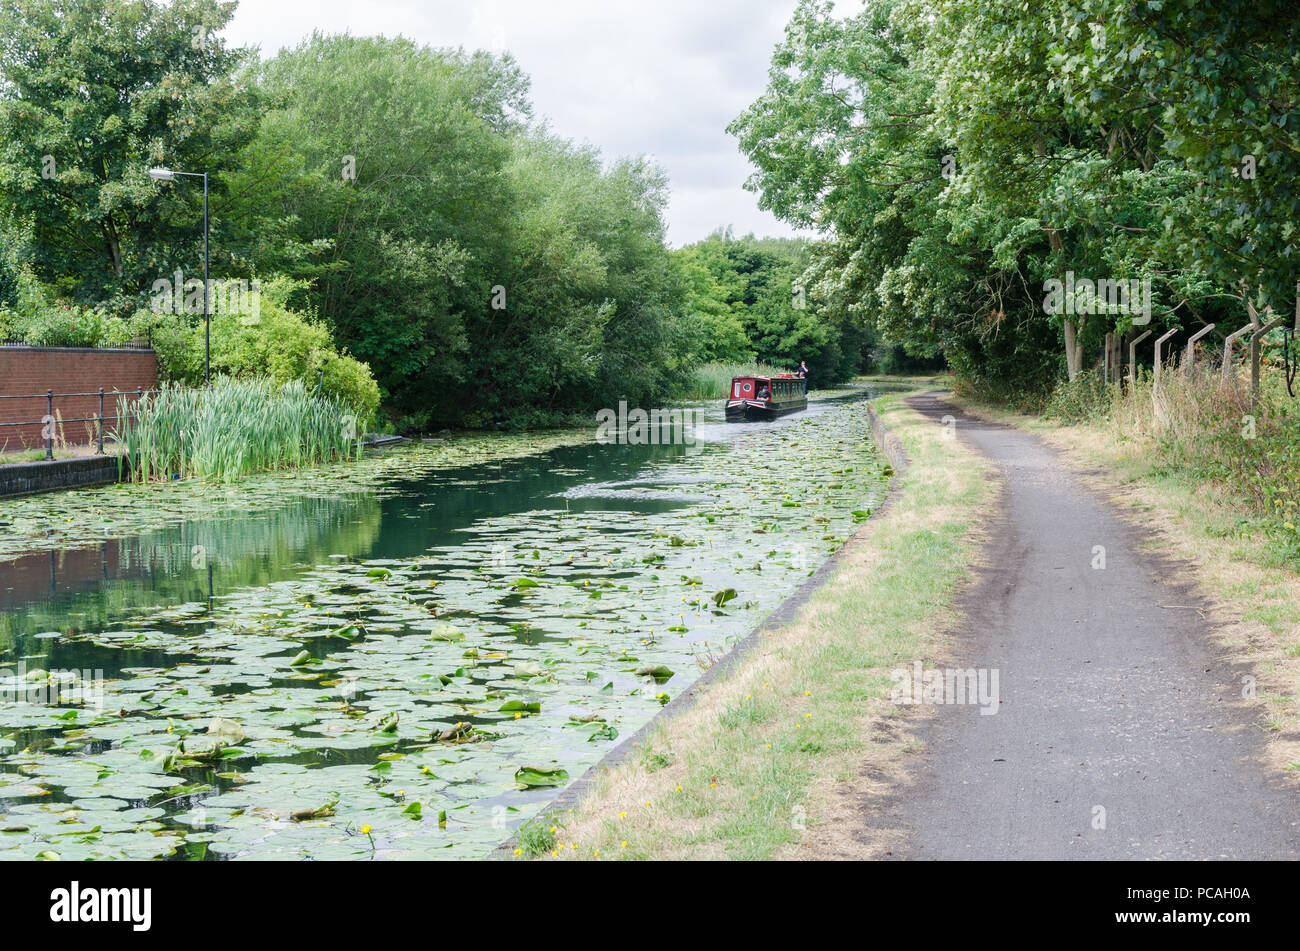 The Birmingham Canal in Tipton, Dudley which runs between Birmingham and Wolverhampton with water lilies growing in the unpolluted water Stock Photo